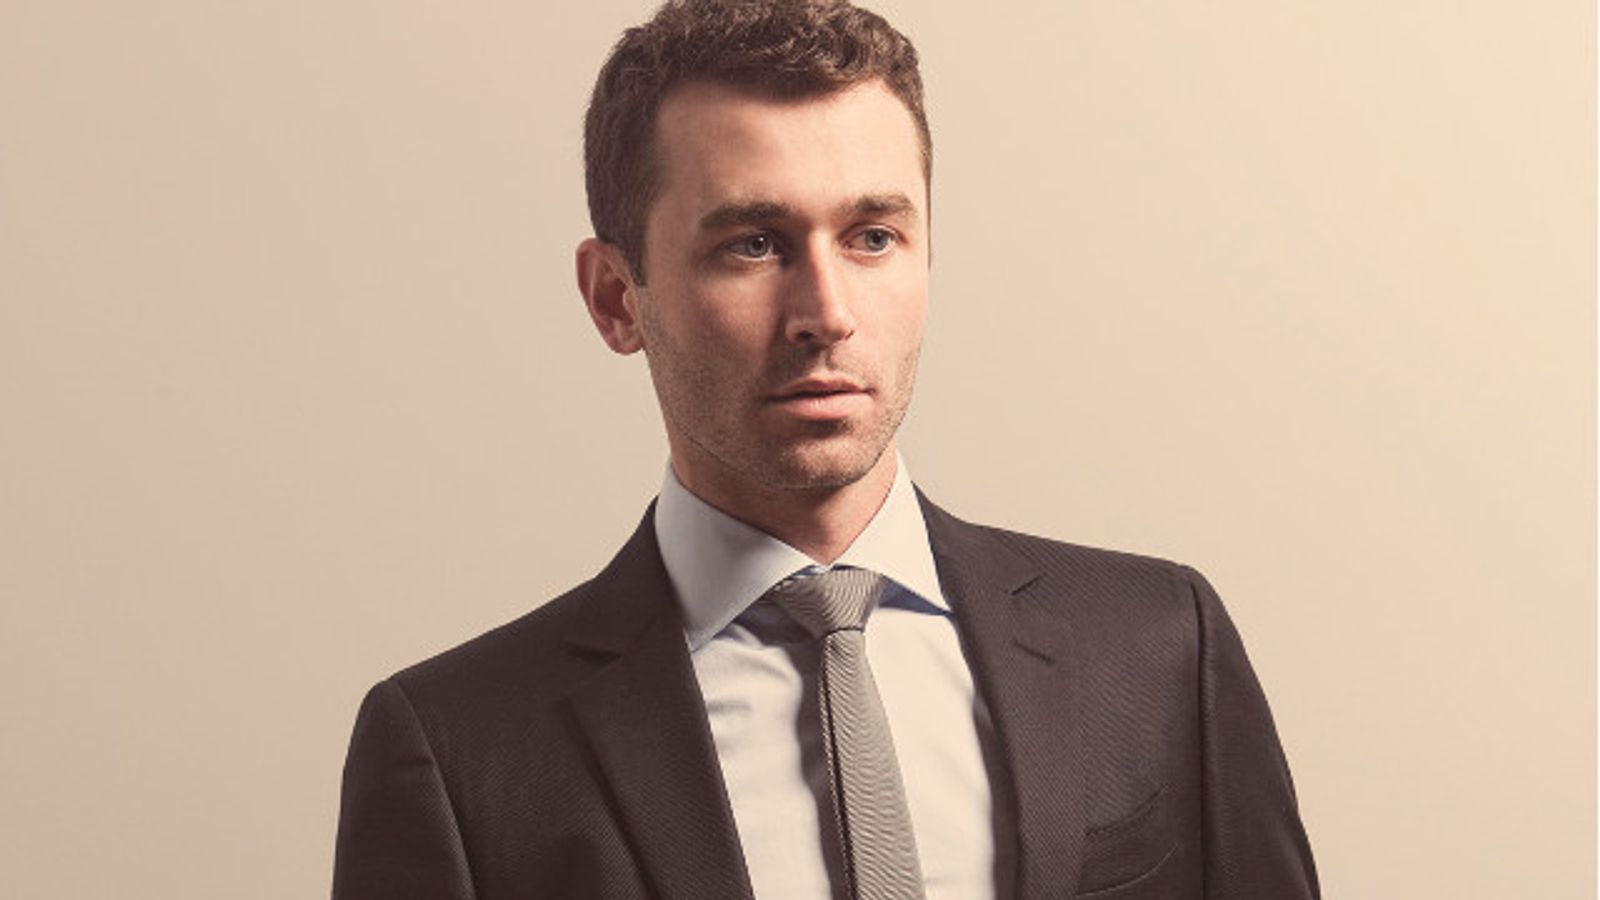 James Deen Speaks to 'The Daily Beast'